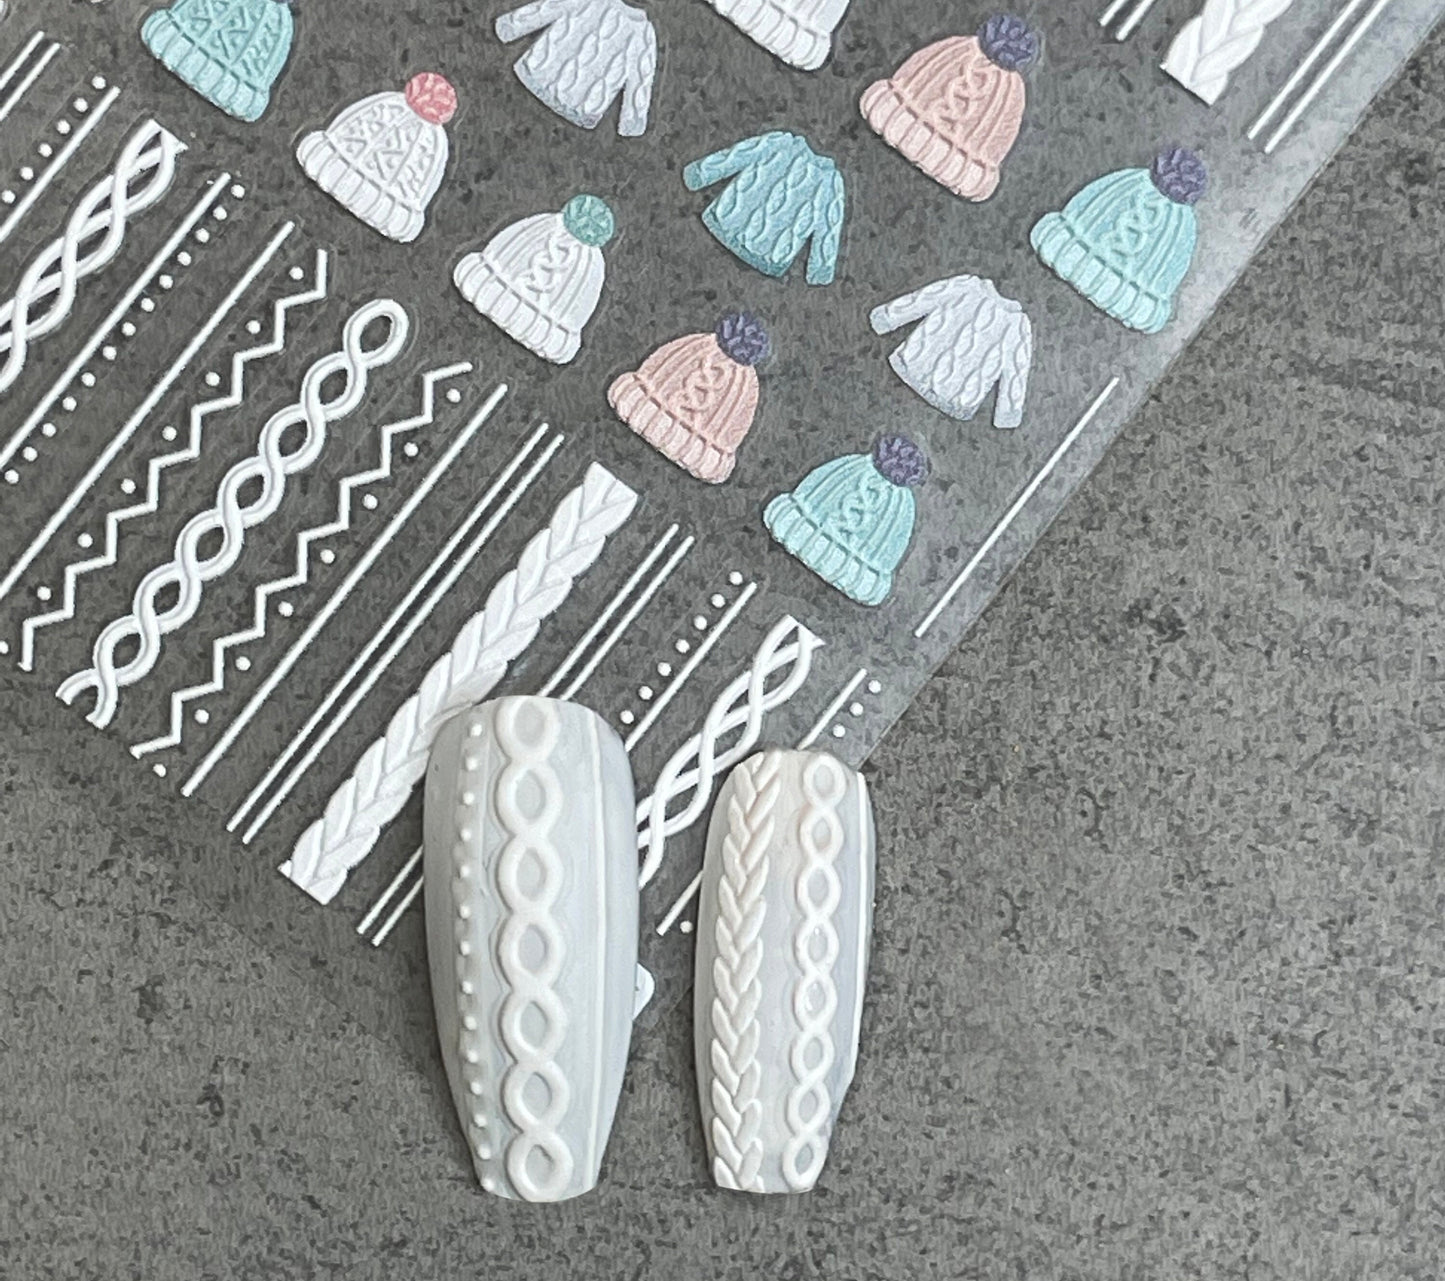 Knit Sweater Nail Art Stickers Self Decals/ Fall Winter 3D Embossed Textured Sweaters Beanie Peel off Nails Sticker/ Christmas Nails